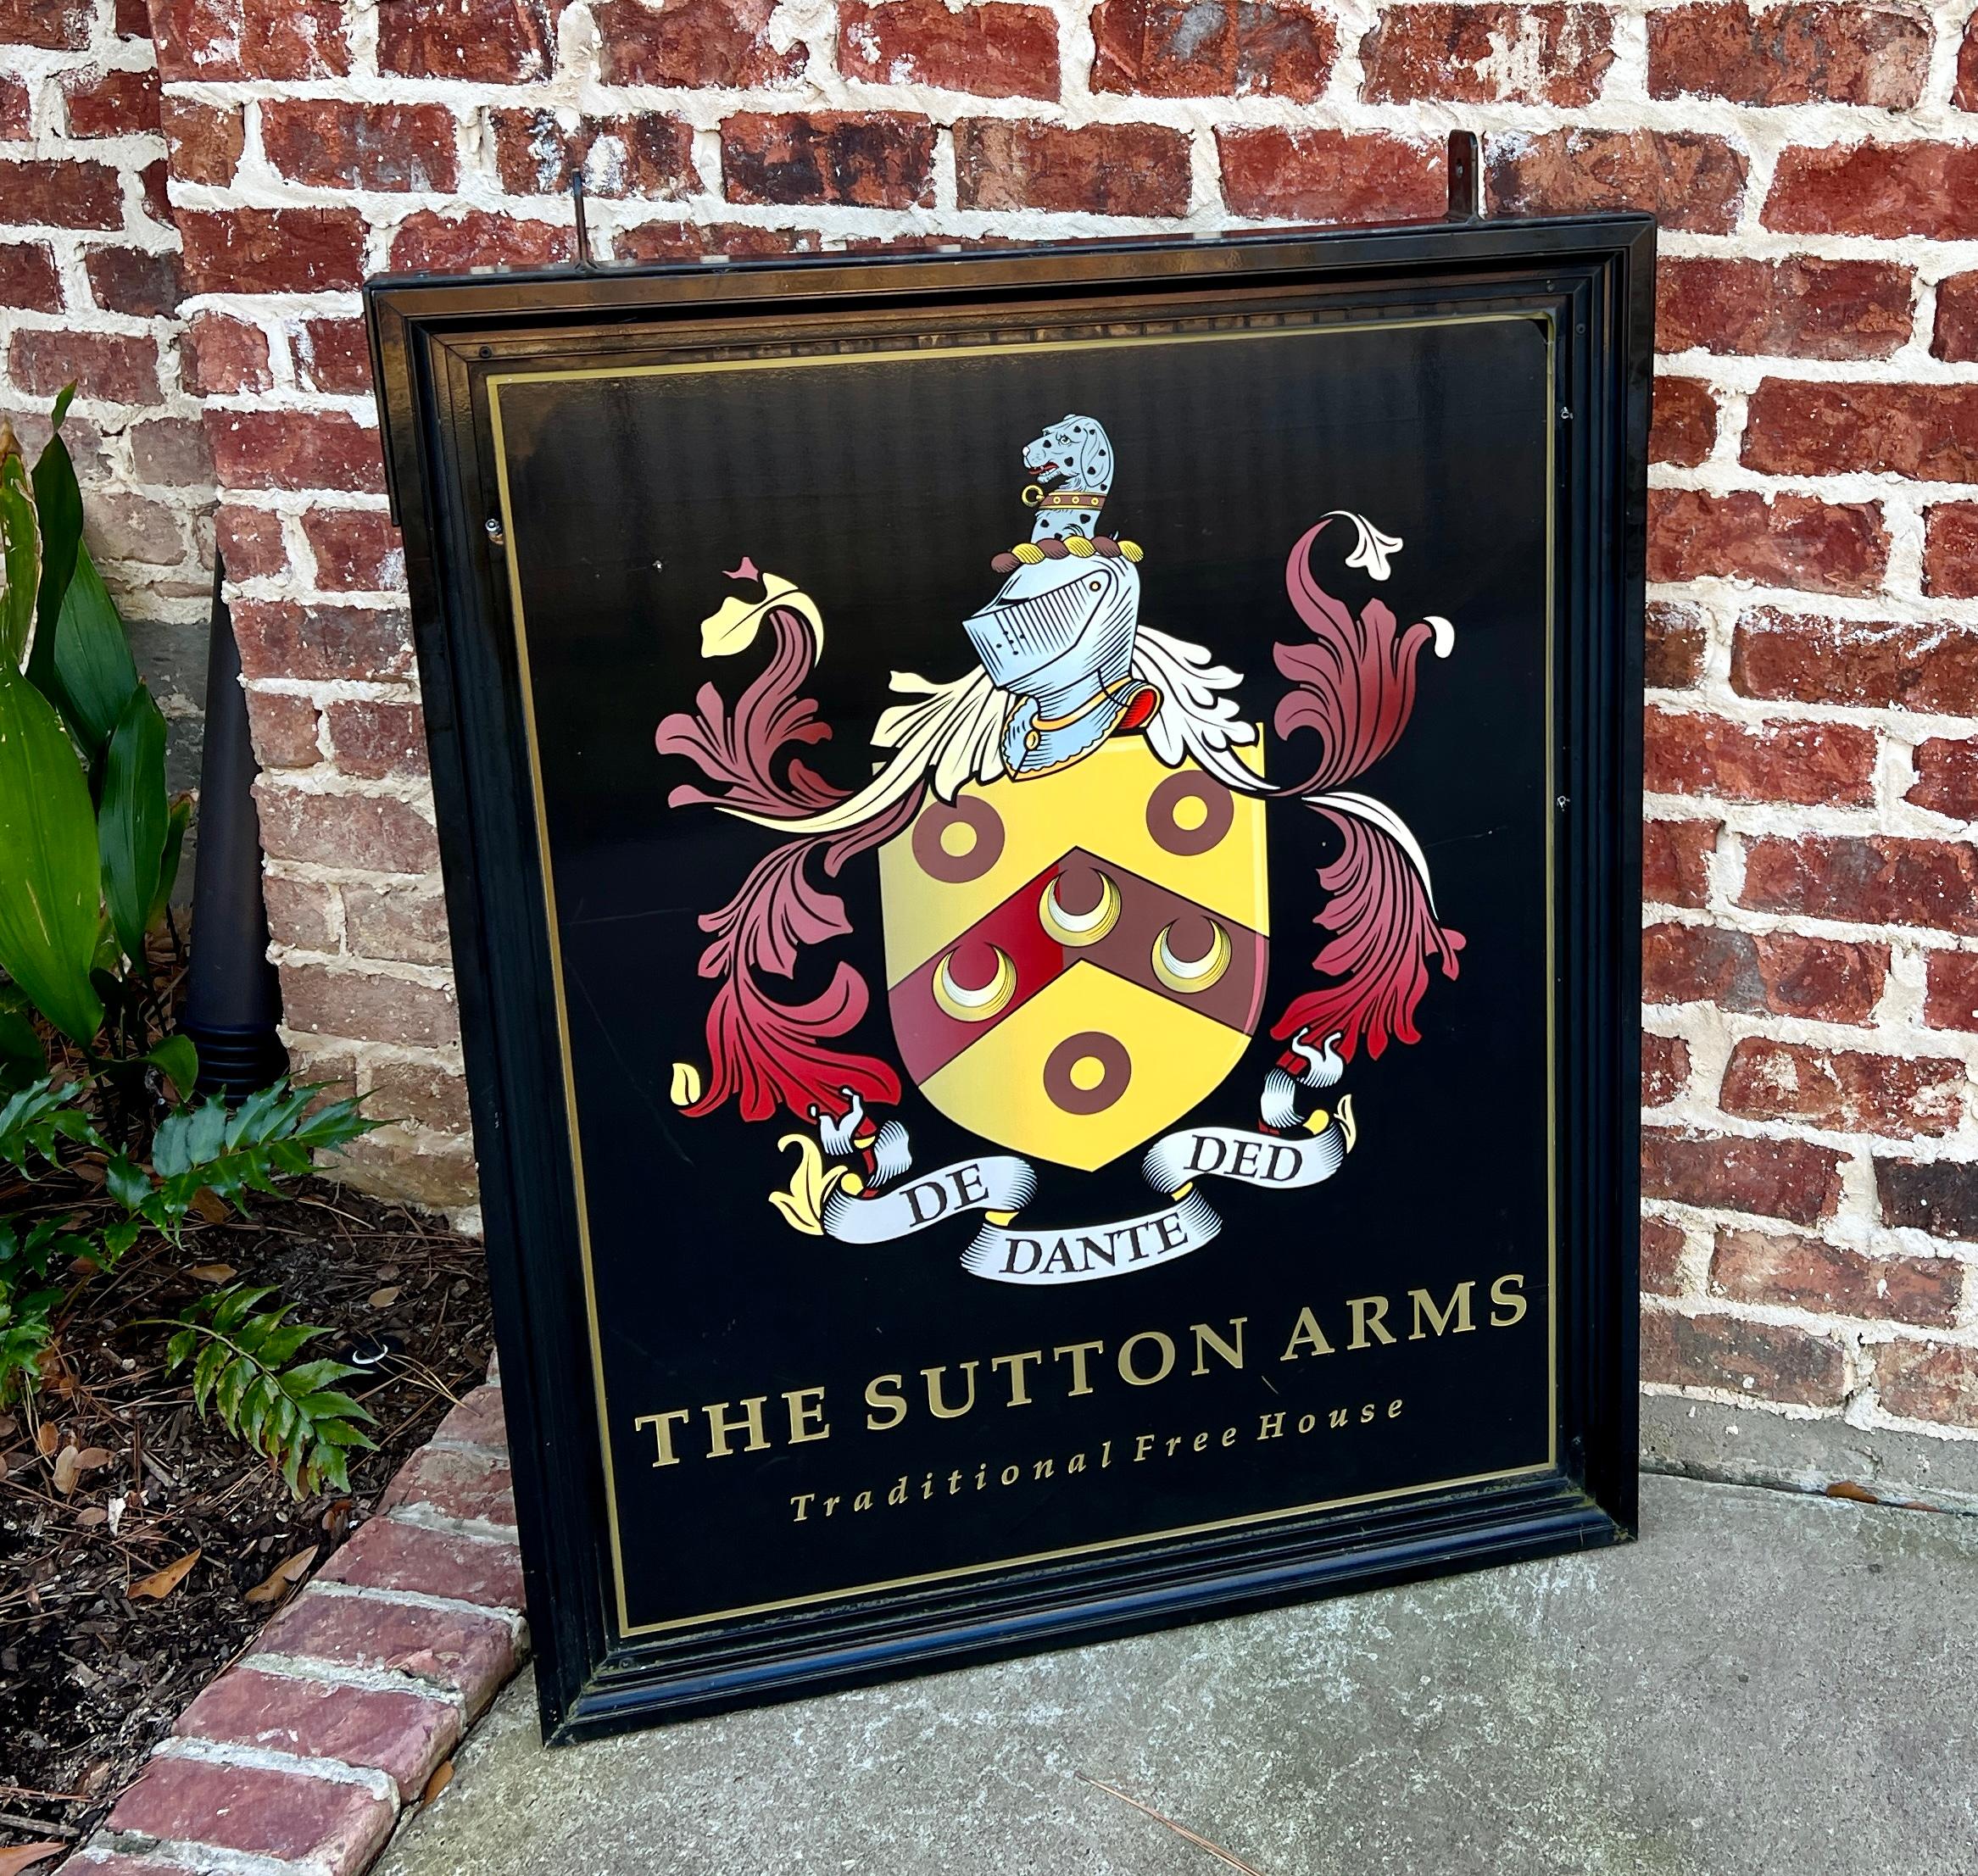 Vintage English Pub Sign Metal Double Sided Sutton Arms Traditional Free House For Sale 14